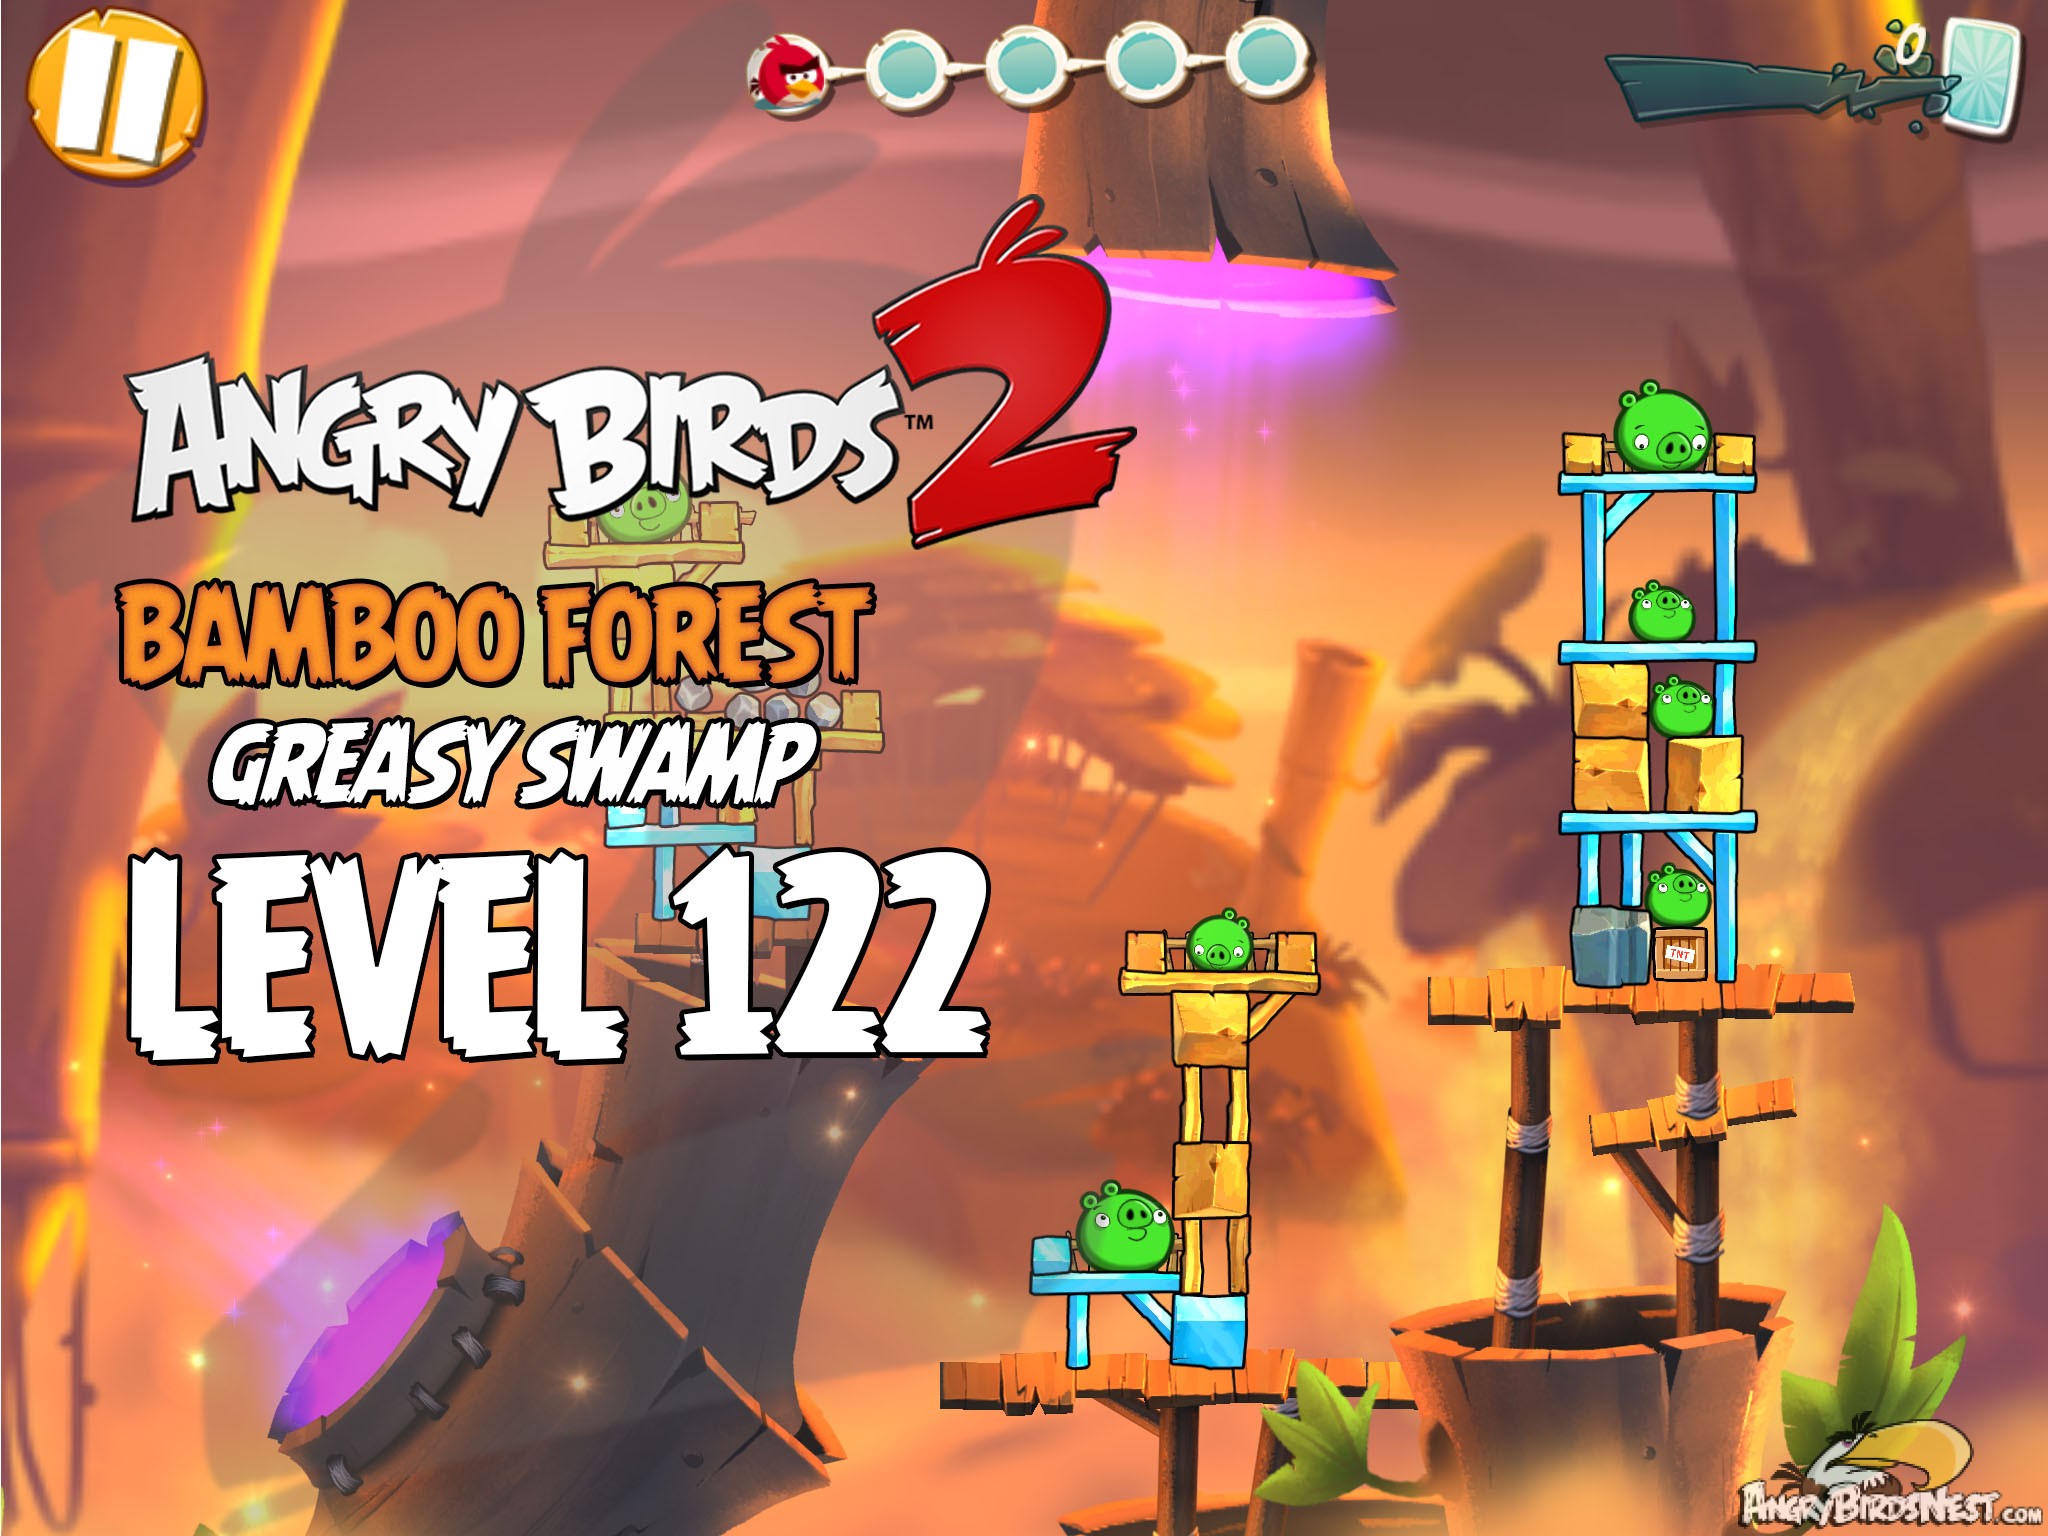 Angry Birds 2 Bamboo Forest Greasy Swamp Level 122